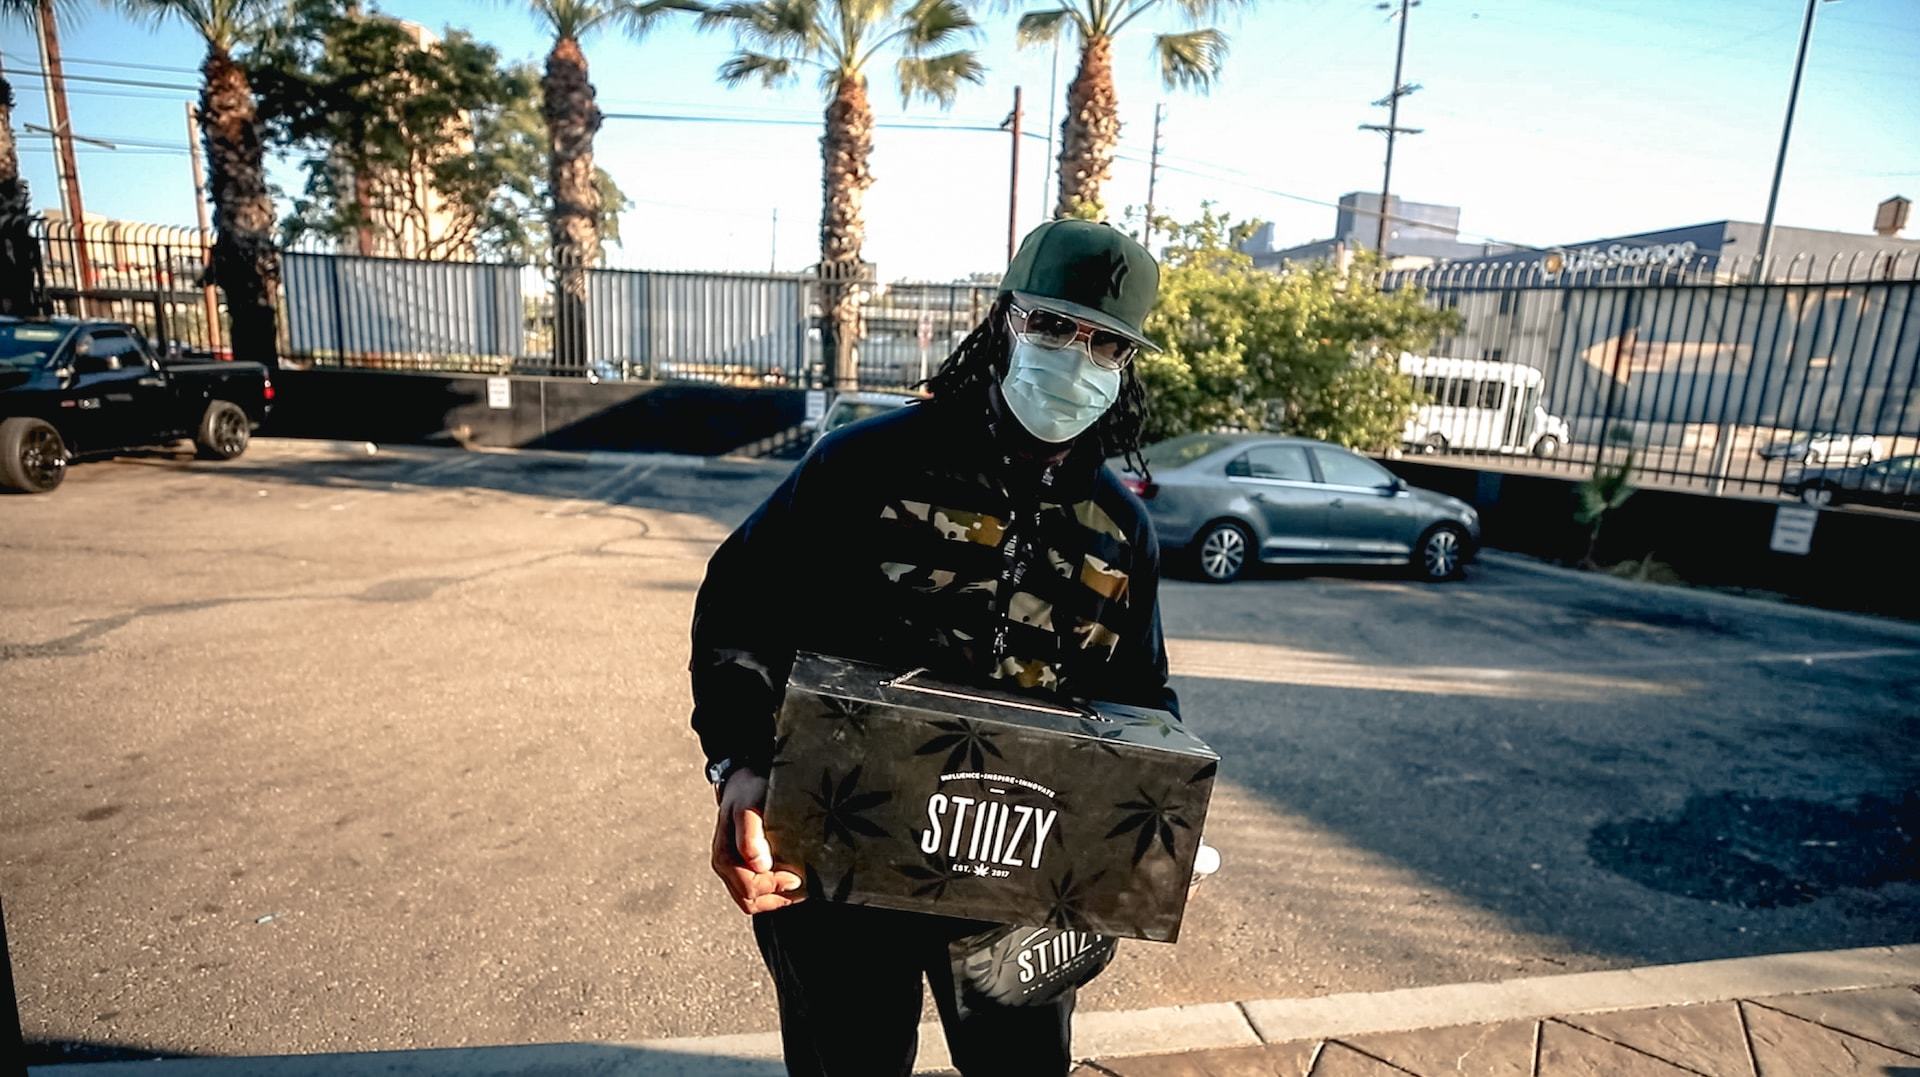 THE FIRST WEED FOR WARRIORS SB34 SUPPLY DROP, RESUPPLY EVENT AT STIIIZY DTLA